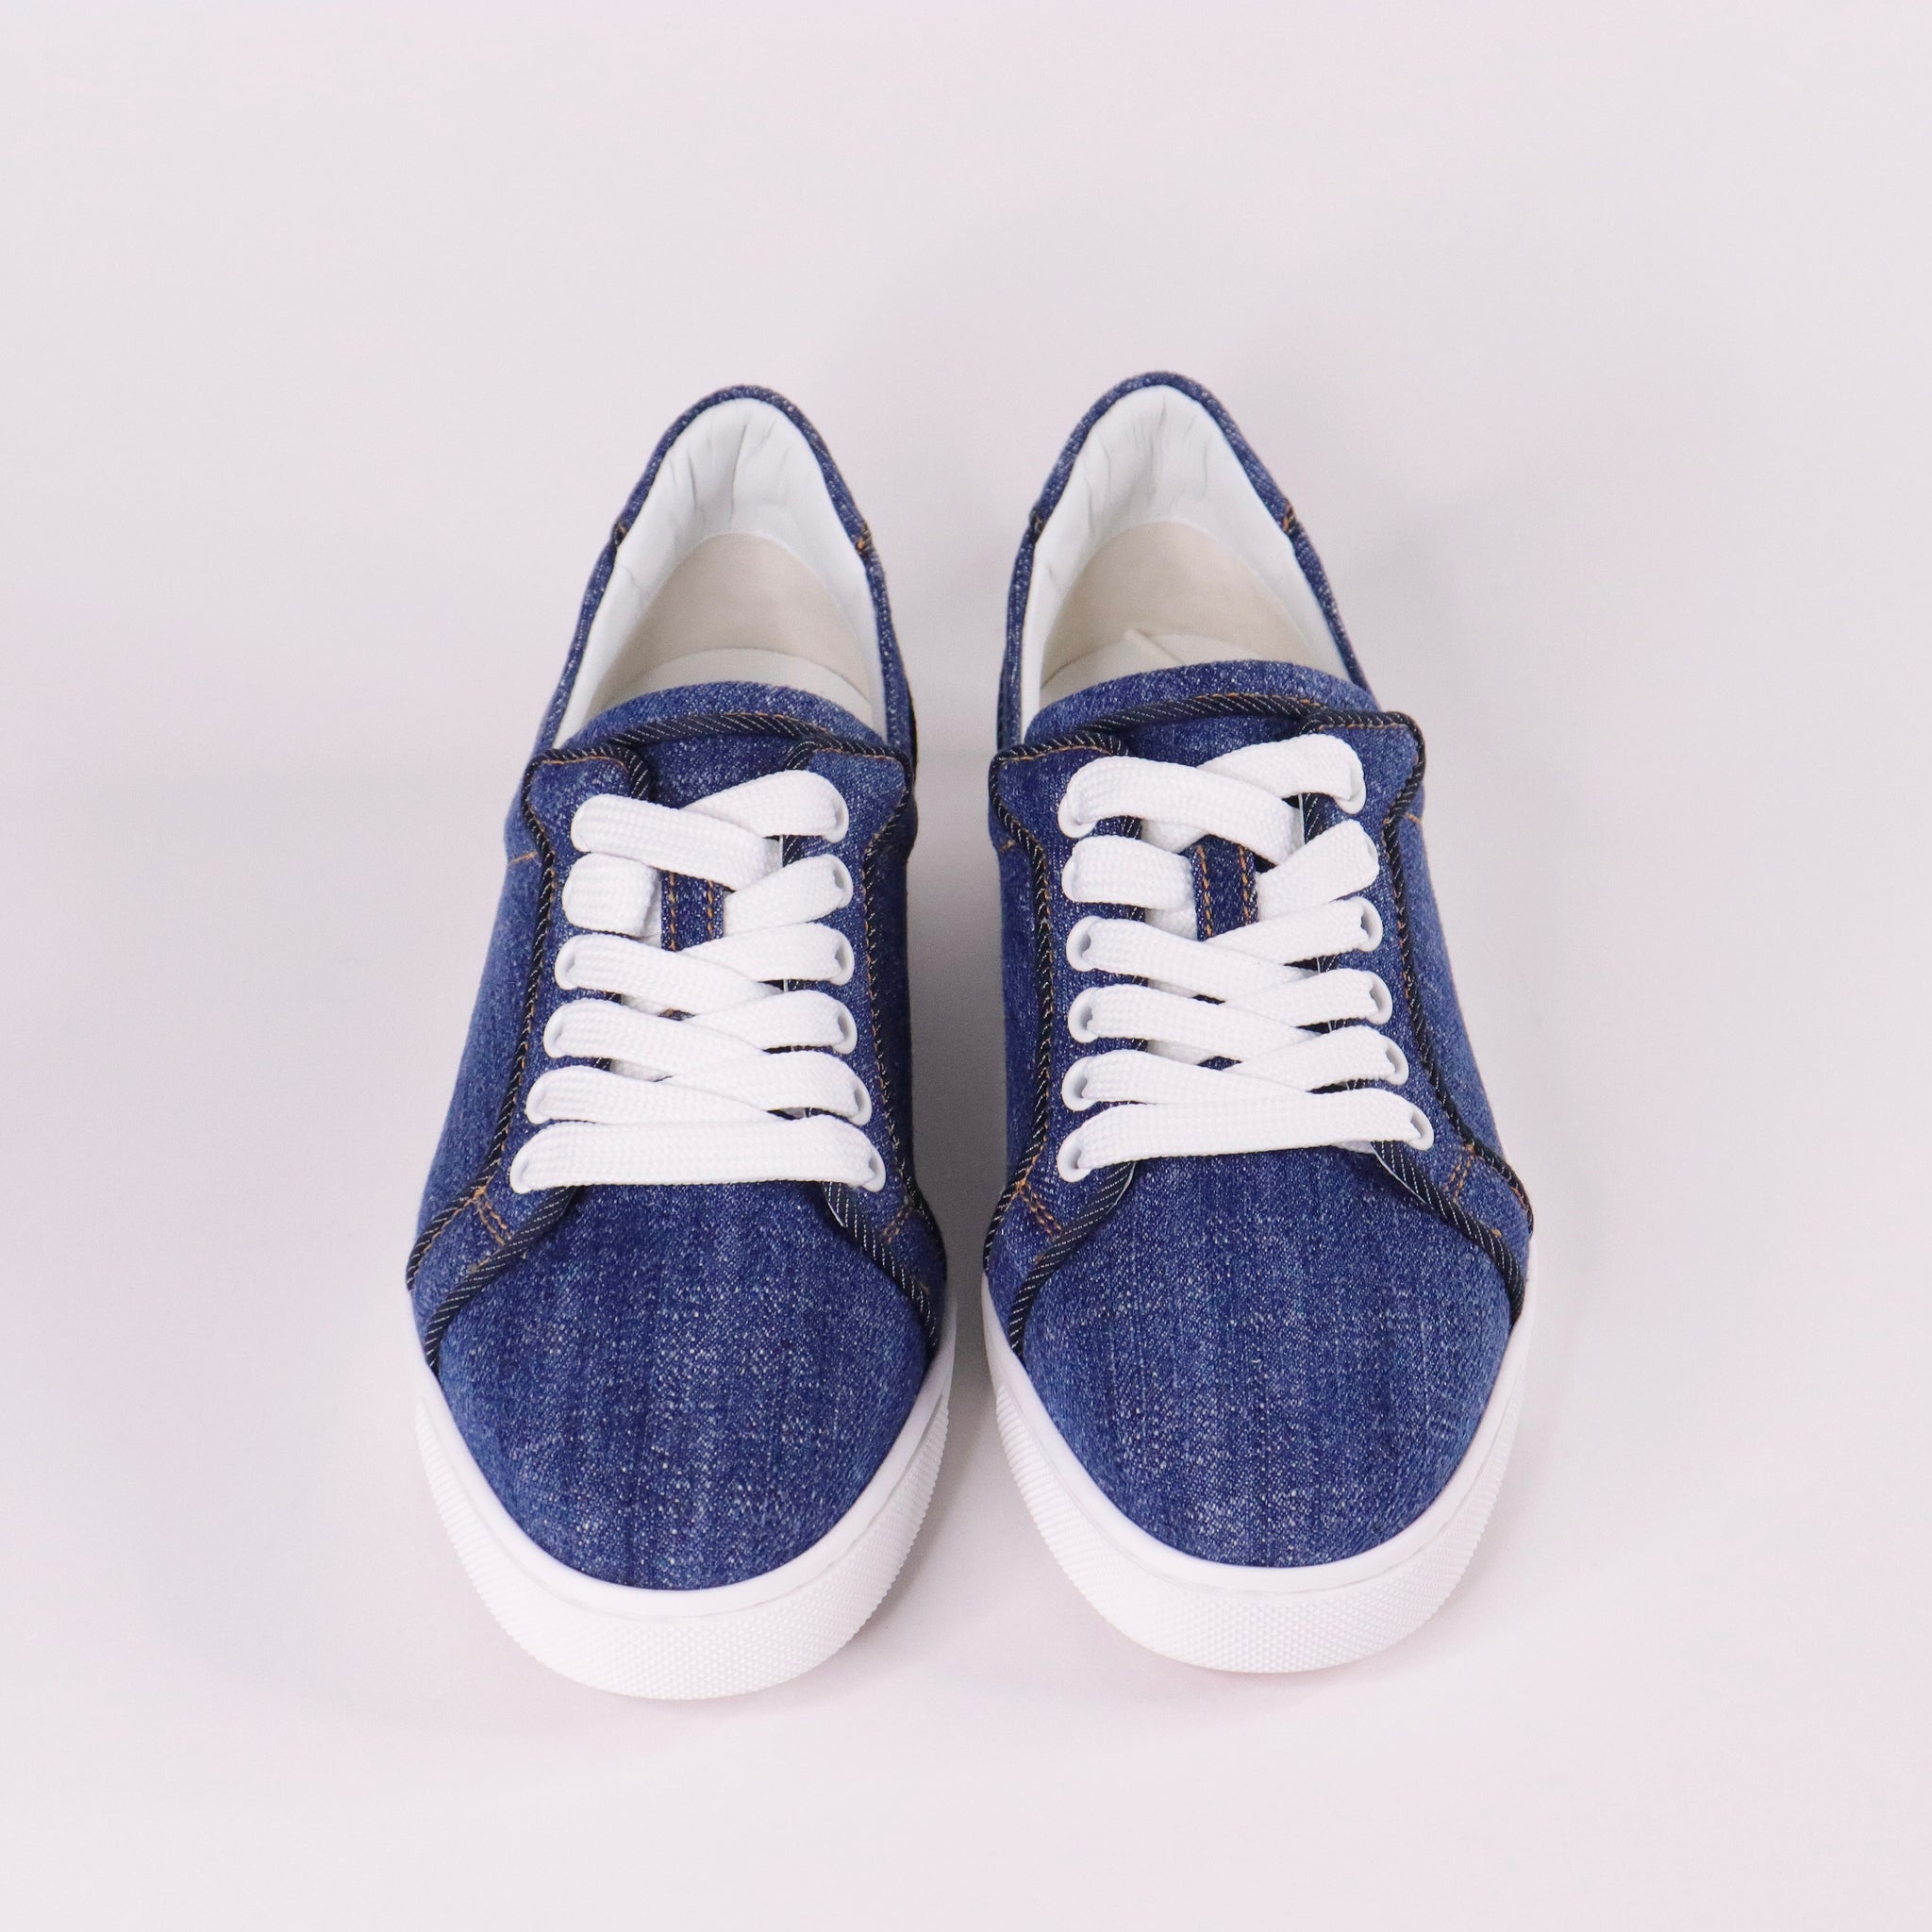 LOUIS VUITTON LV TRAINERS / SNEAKERS DENIM BLUE & WHITE | UNBOXING, REVIEW  & TRY ON - YouTube